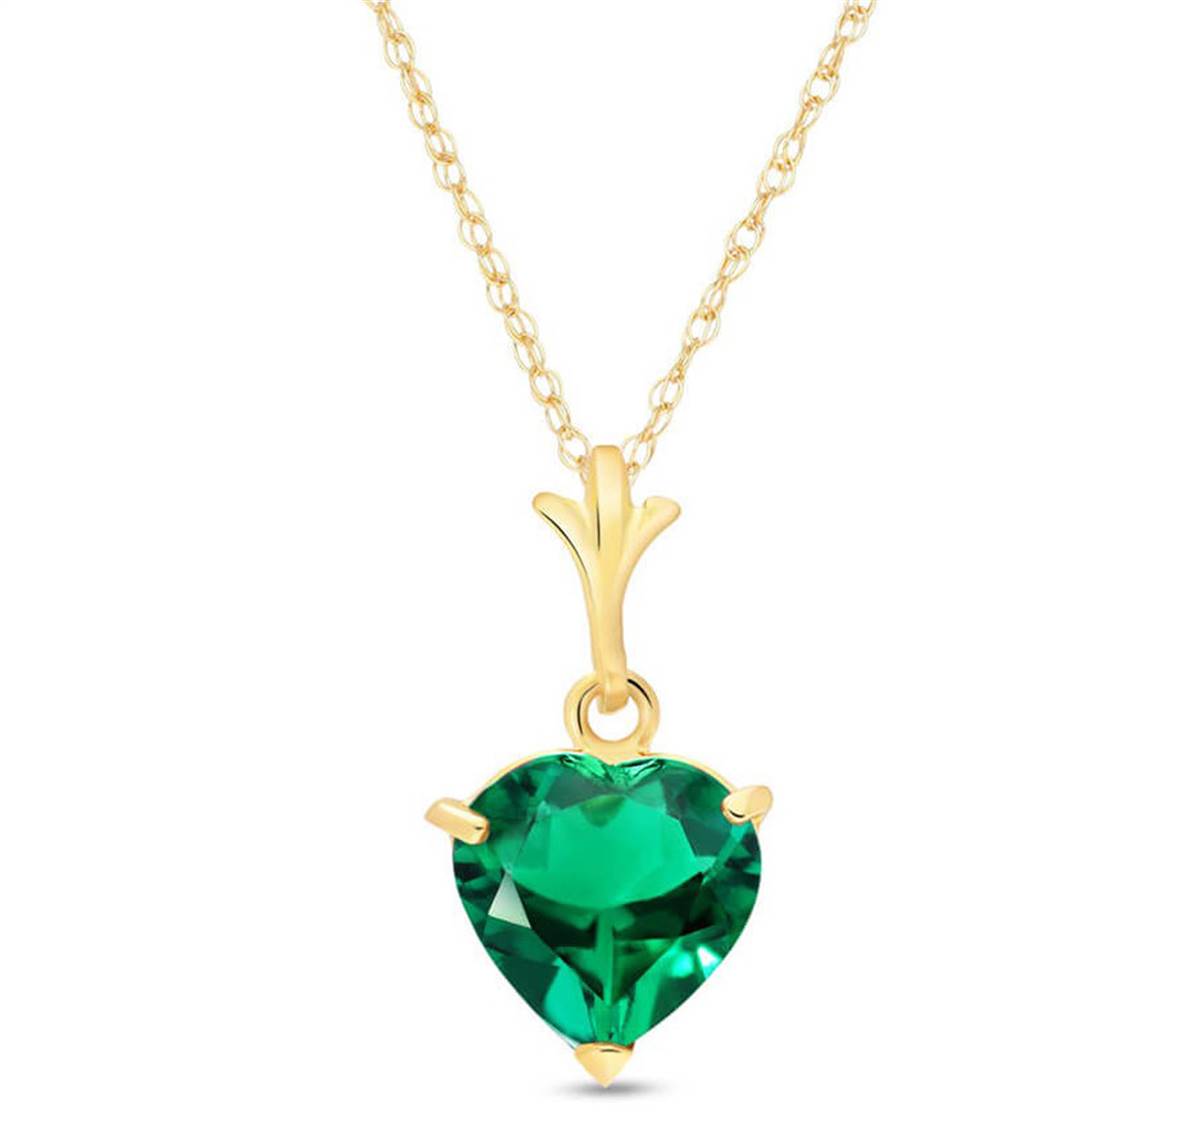 14K Solid Yellow Gold Necklace With Heart Shape 1.00 ctw High Polished Genuine Emerald - Grade AAA